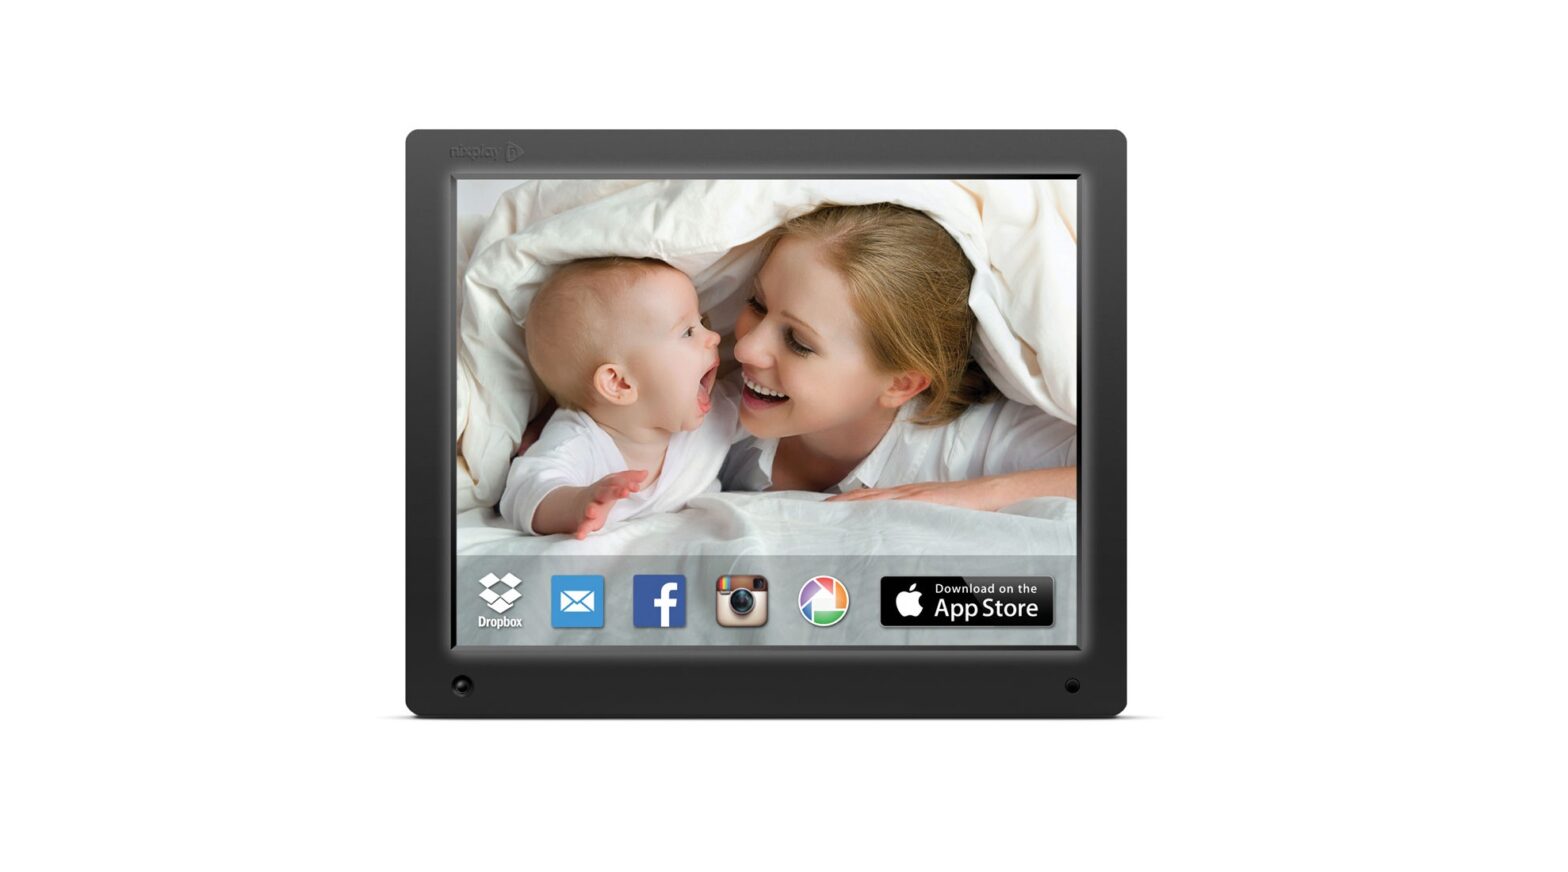 NIXPLAY Pro Cloud WiFi Digital Picture Frame featured